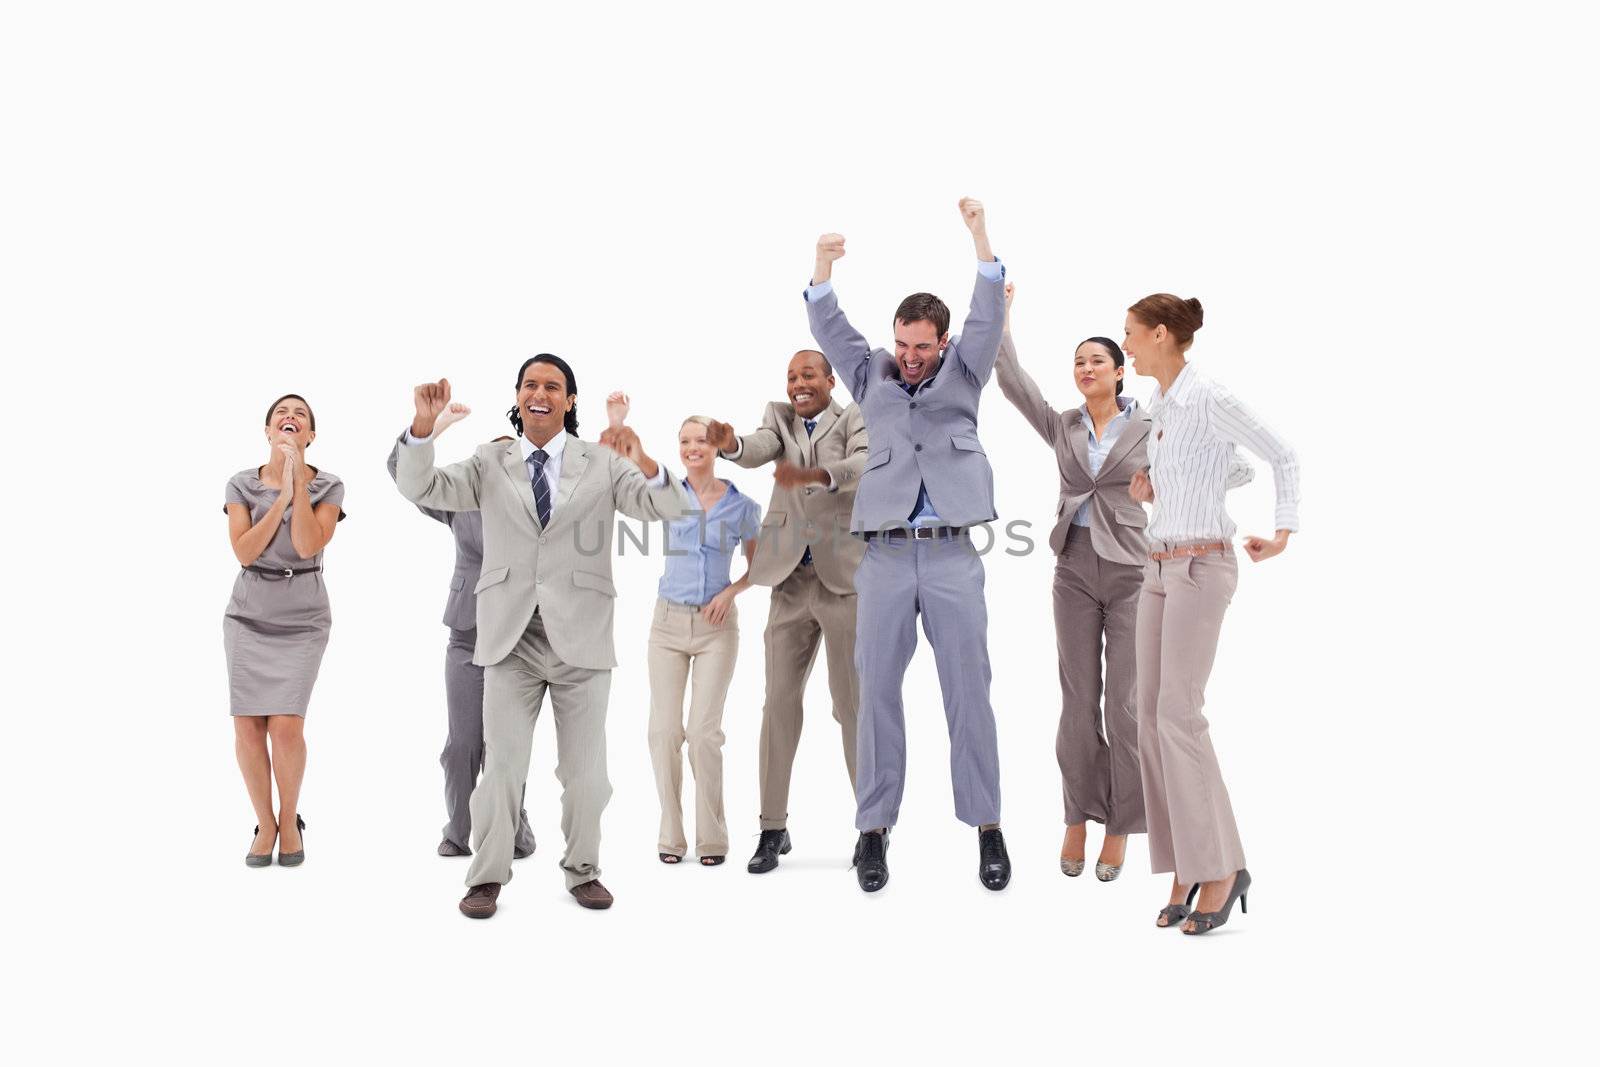 Very enthusiast people jumping and raising their arms against white background